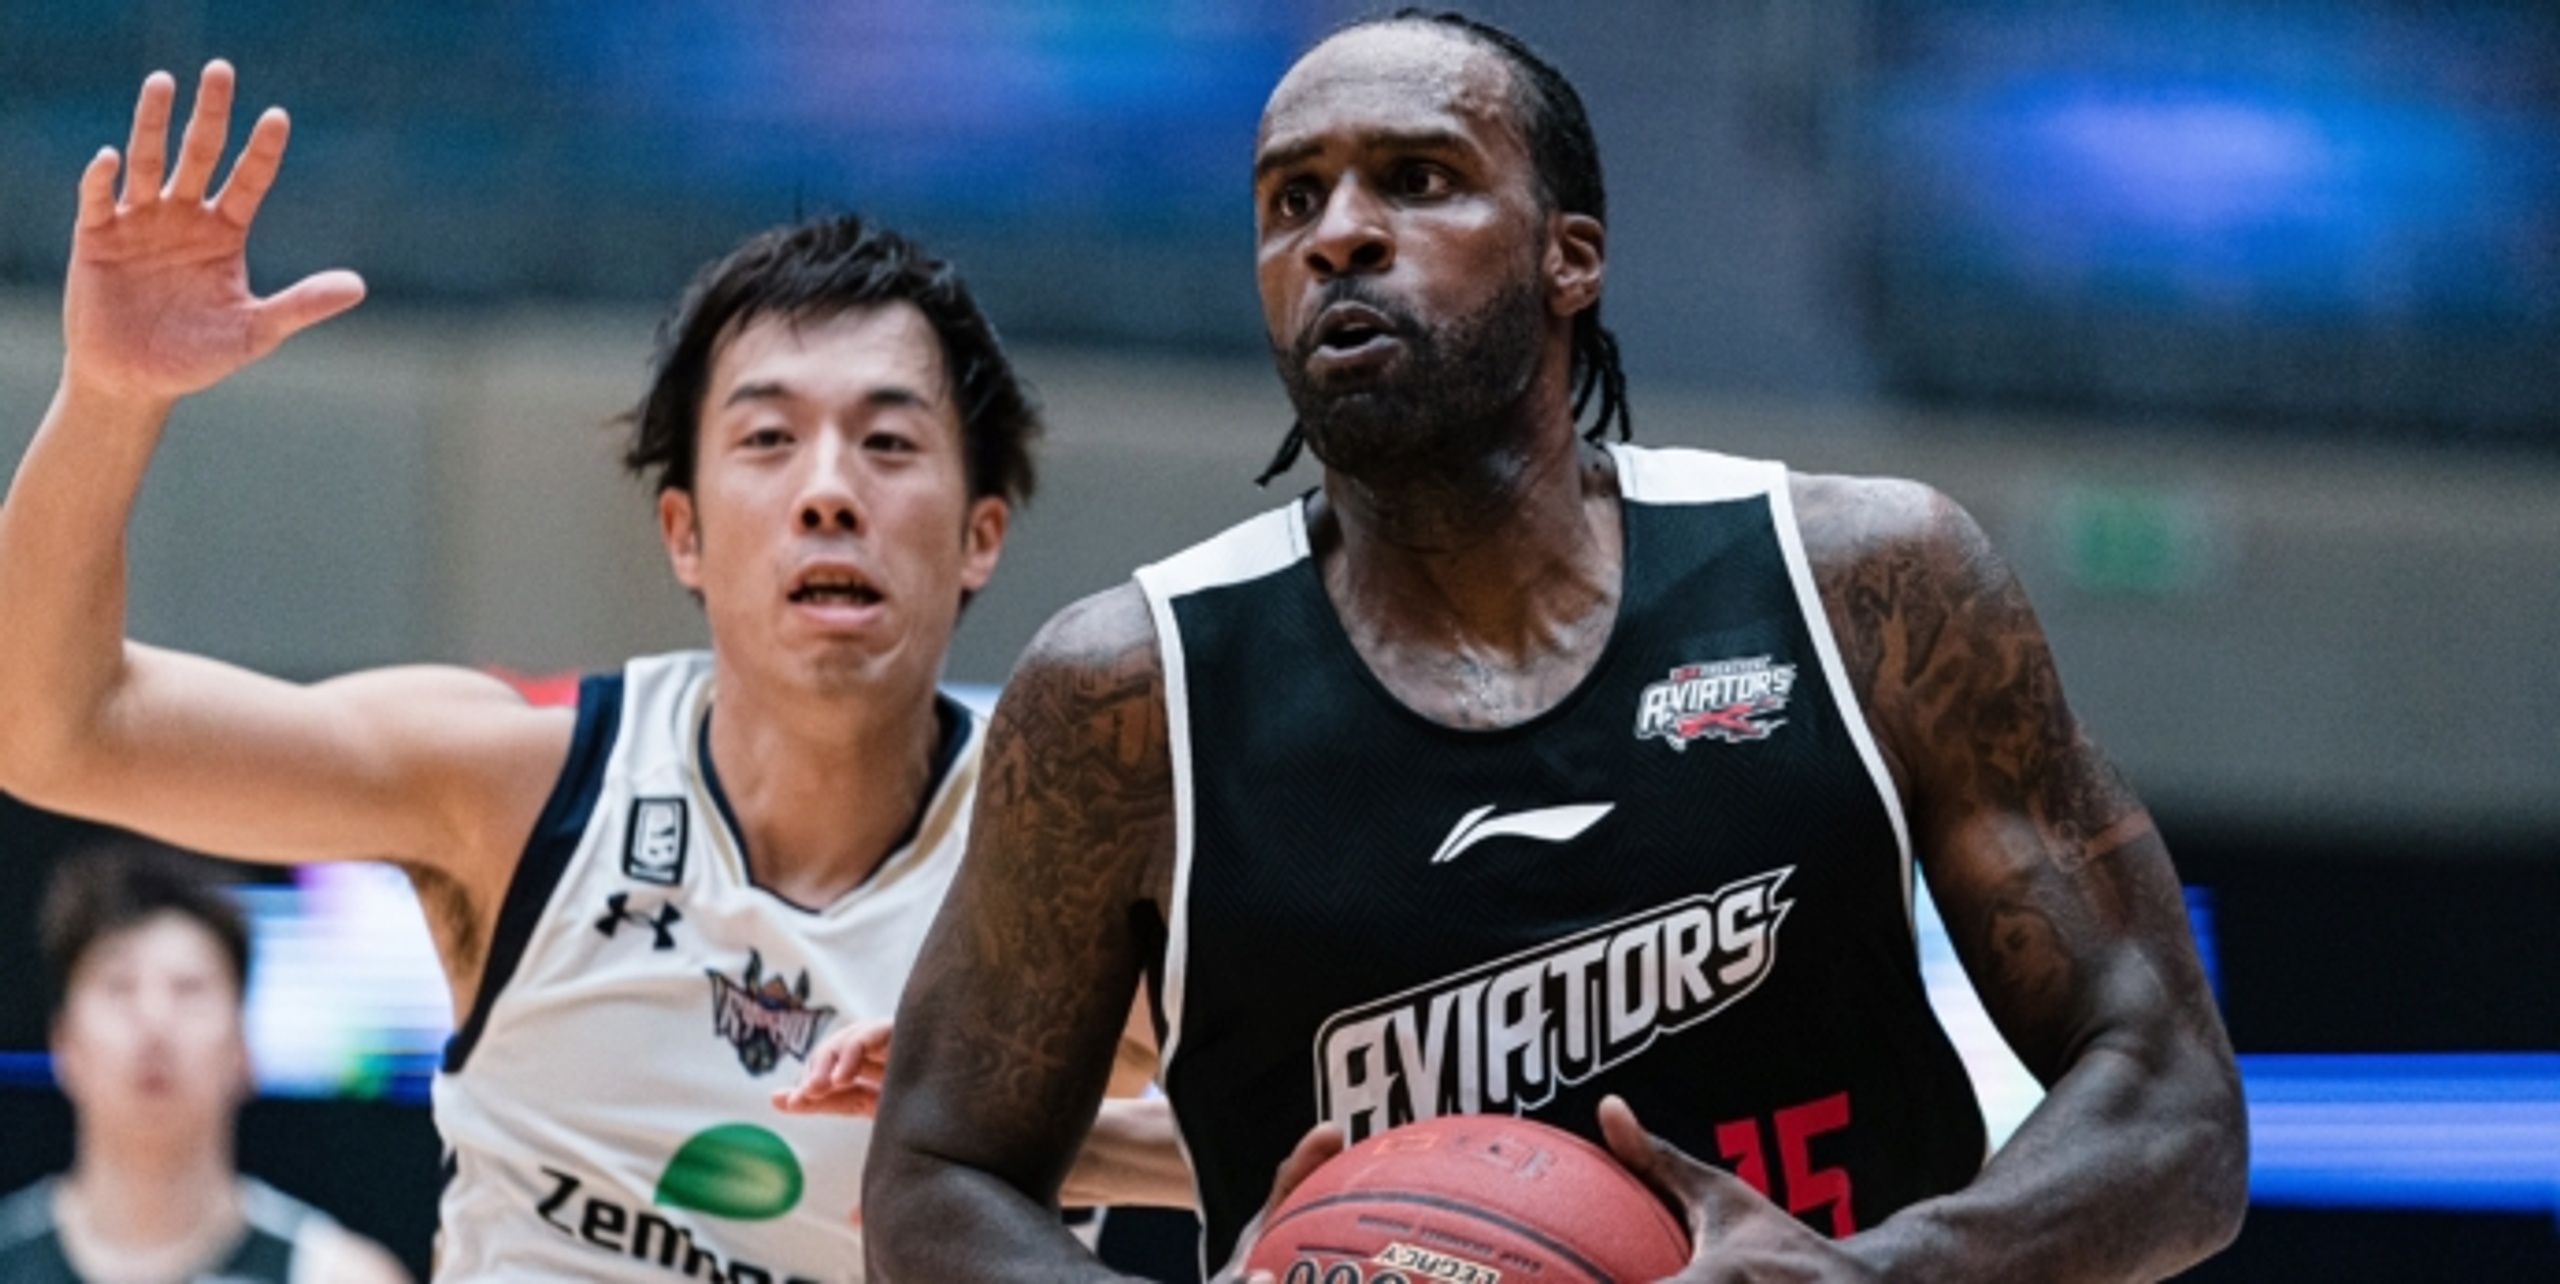 East Asia Super League: Inside a basketball startup with a unique vision